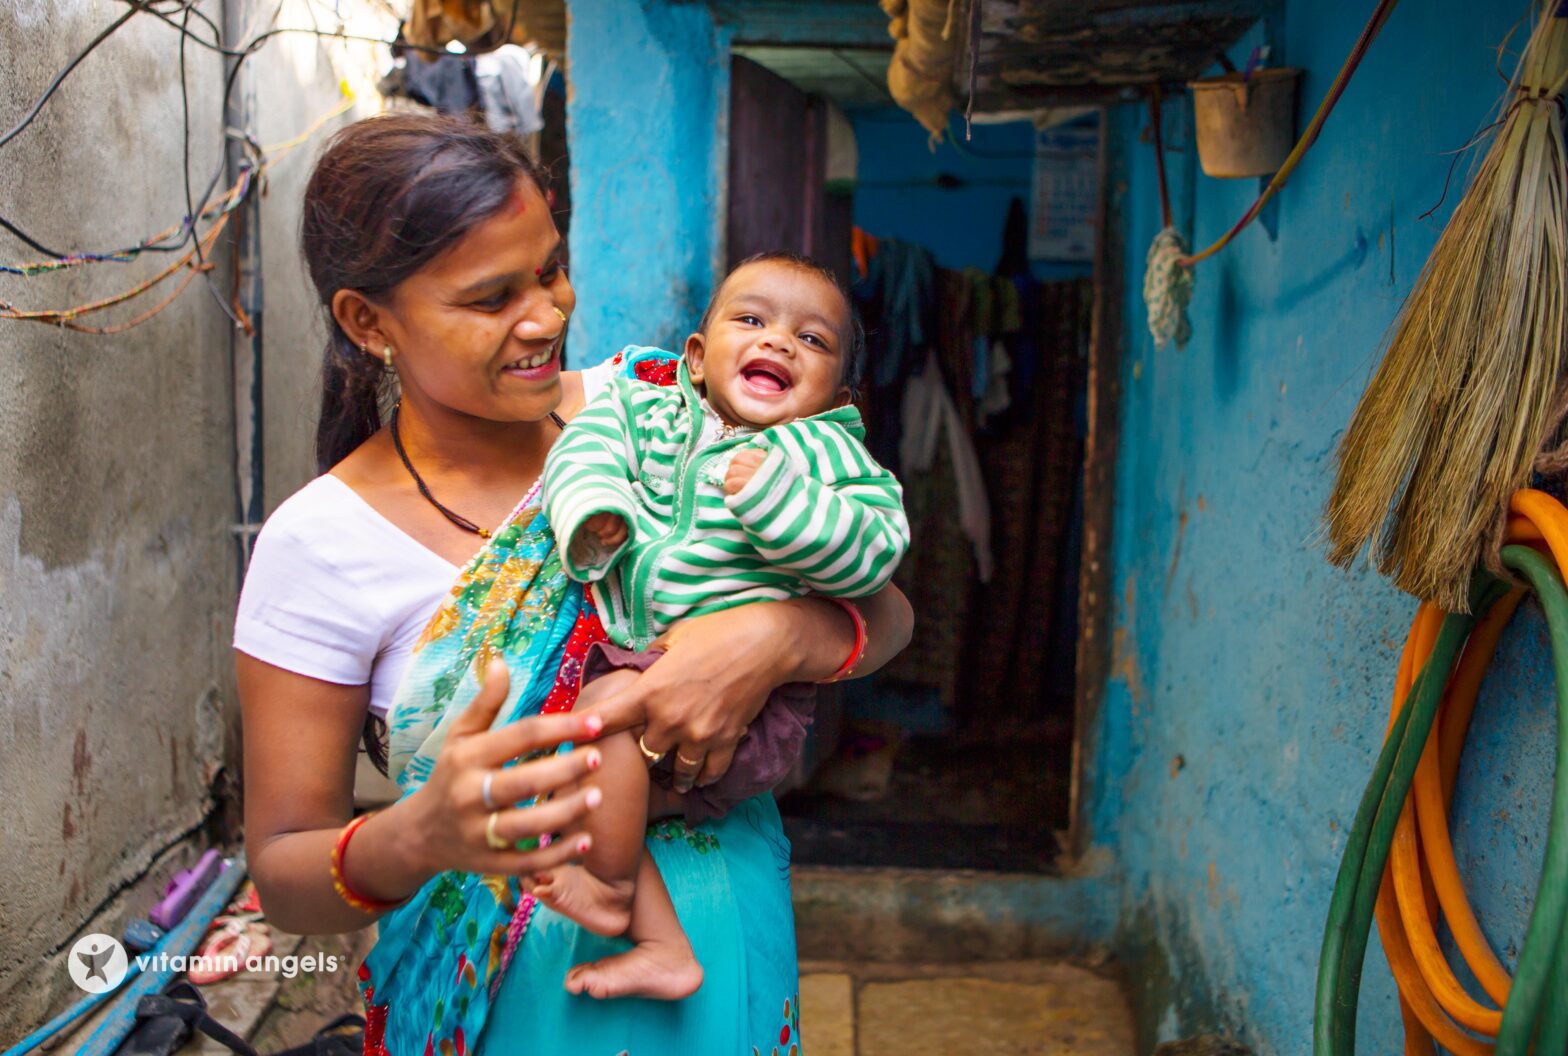 woman in a vibrant blue dress smiling as she holds a laughing baby, in a narrow blue alleyway